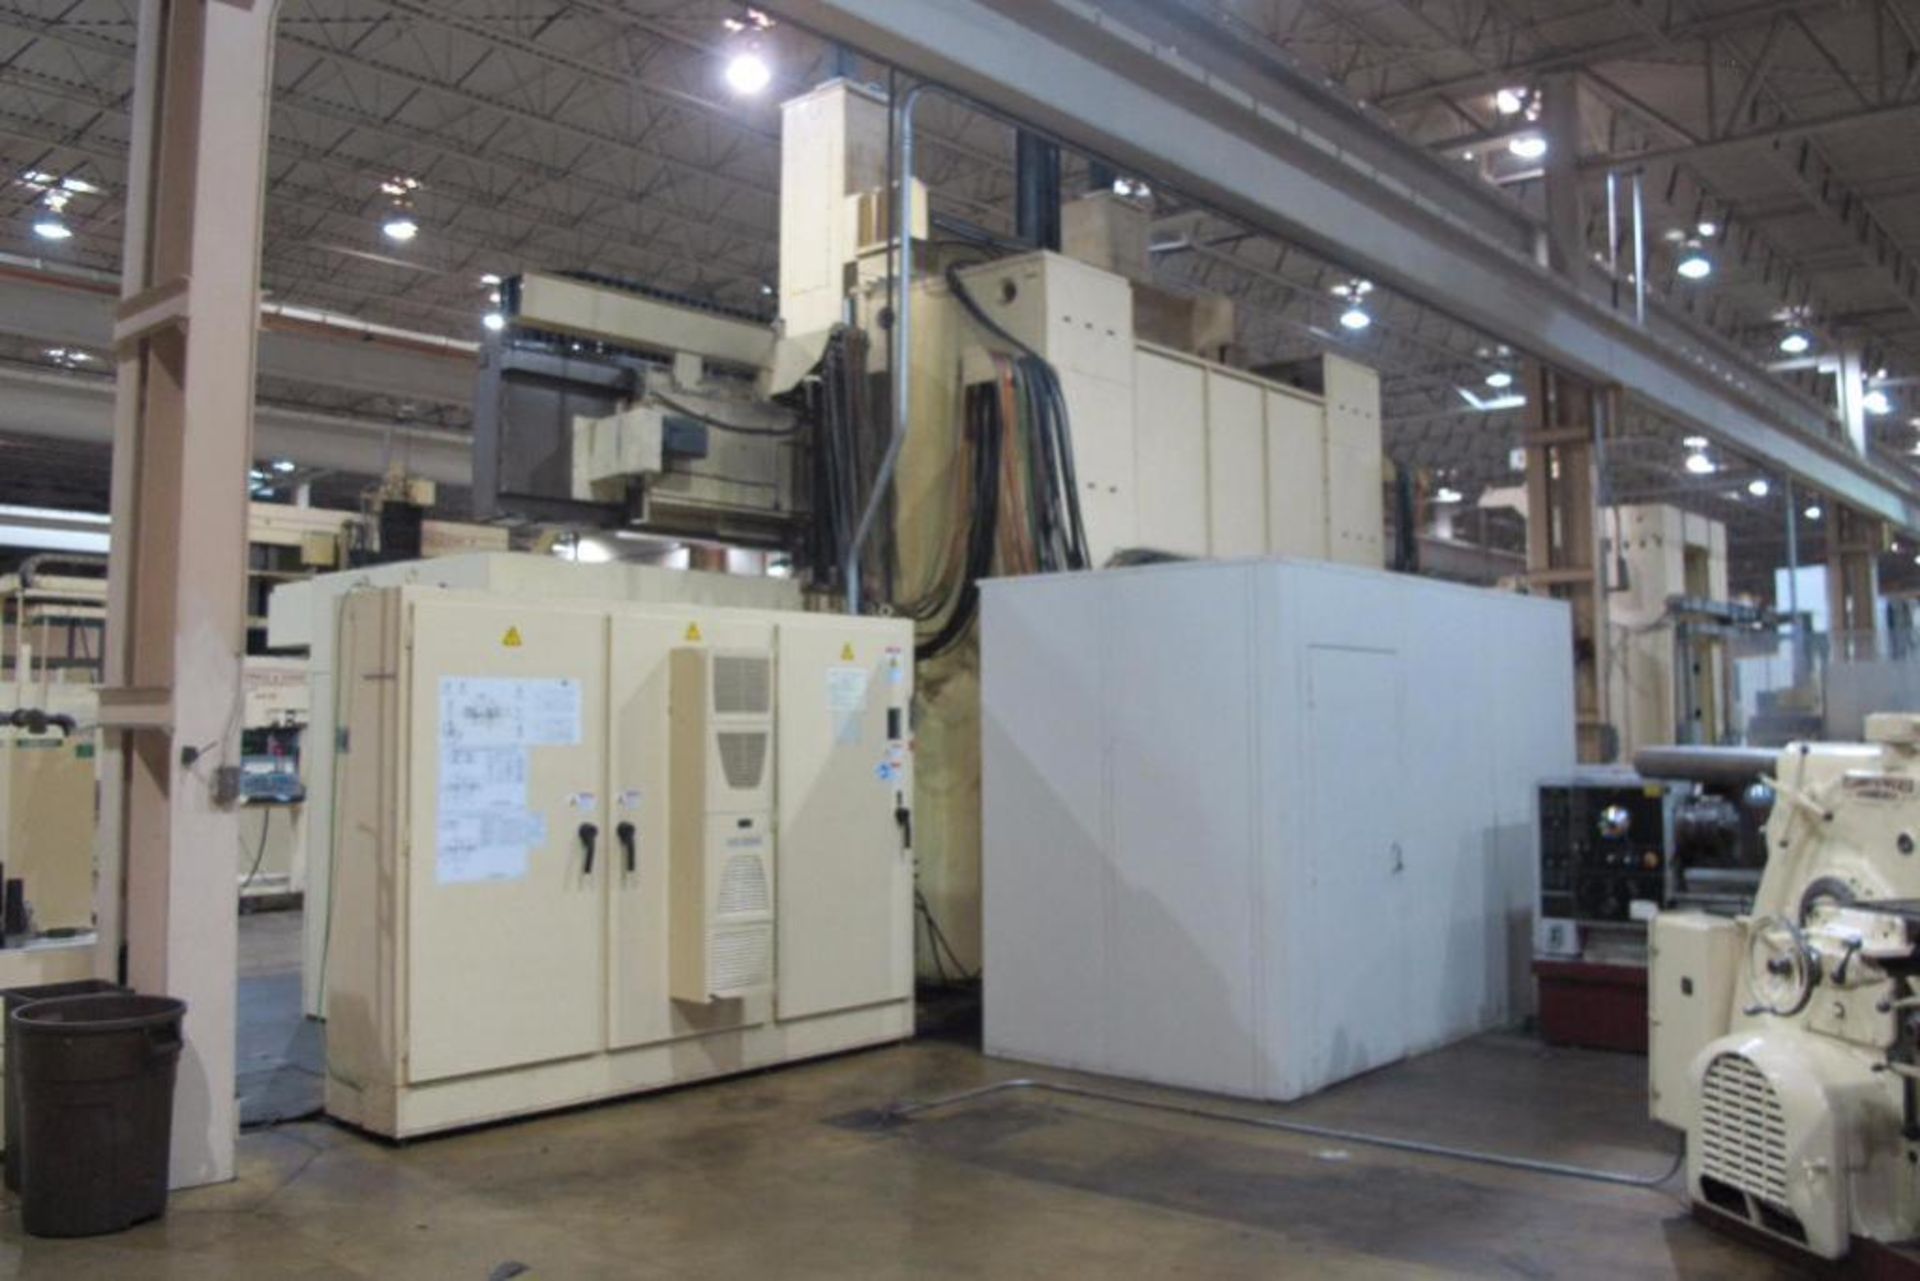 (2007) Giddings & Lewis CNC Vertical Turning Center, VTC 3500, 2-Rams each with 26-Station ATC, 137. - Image 11 of 11